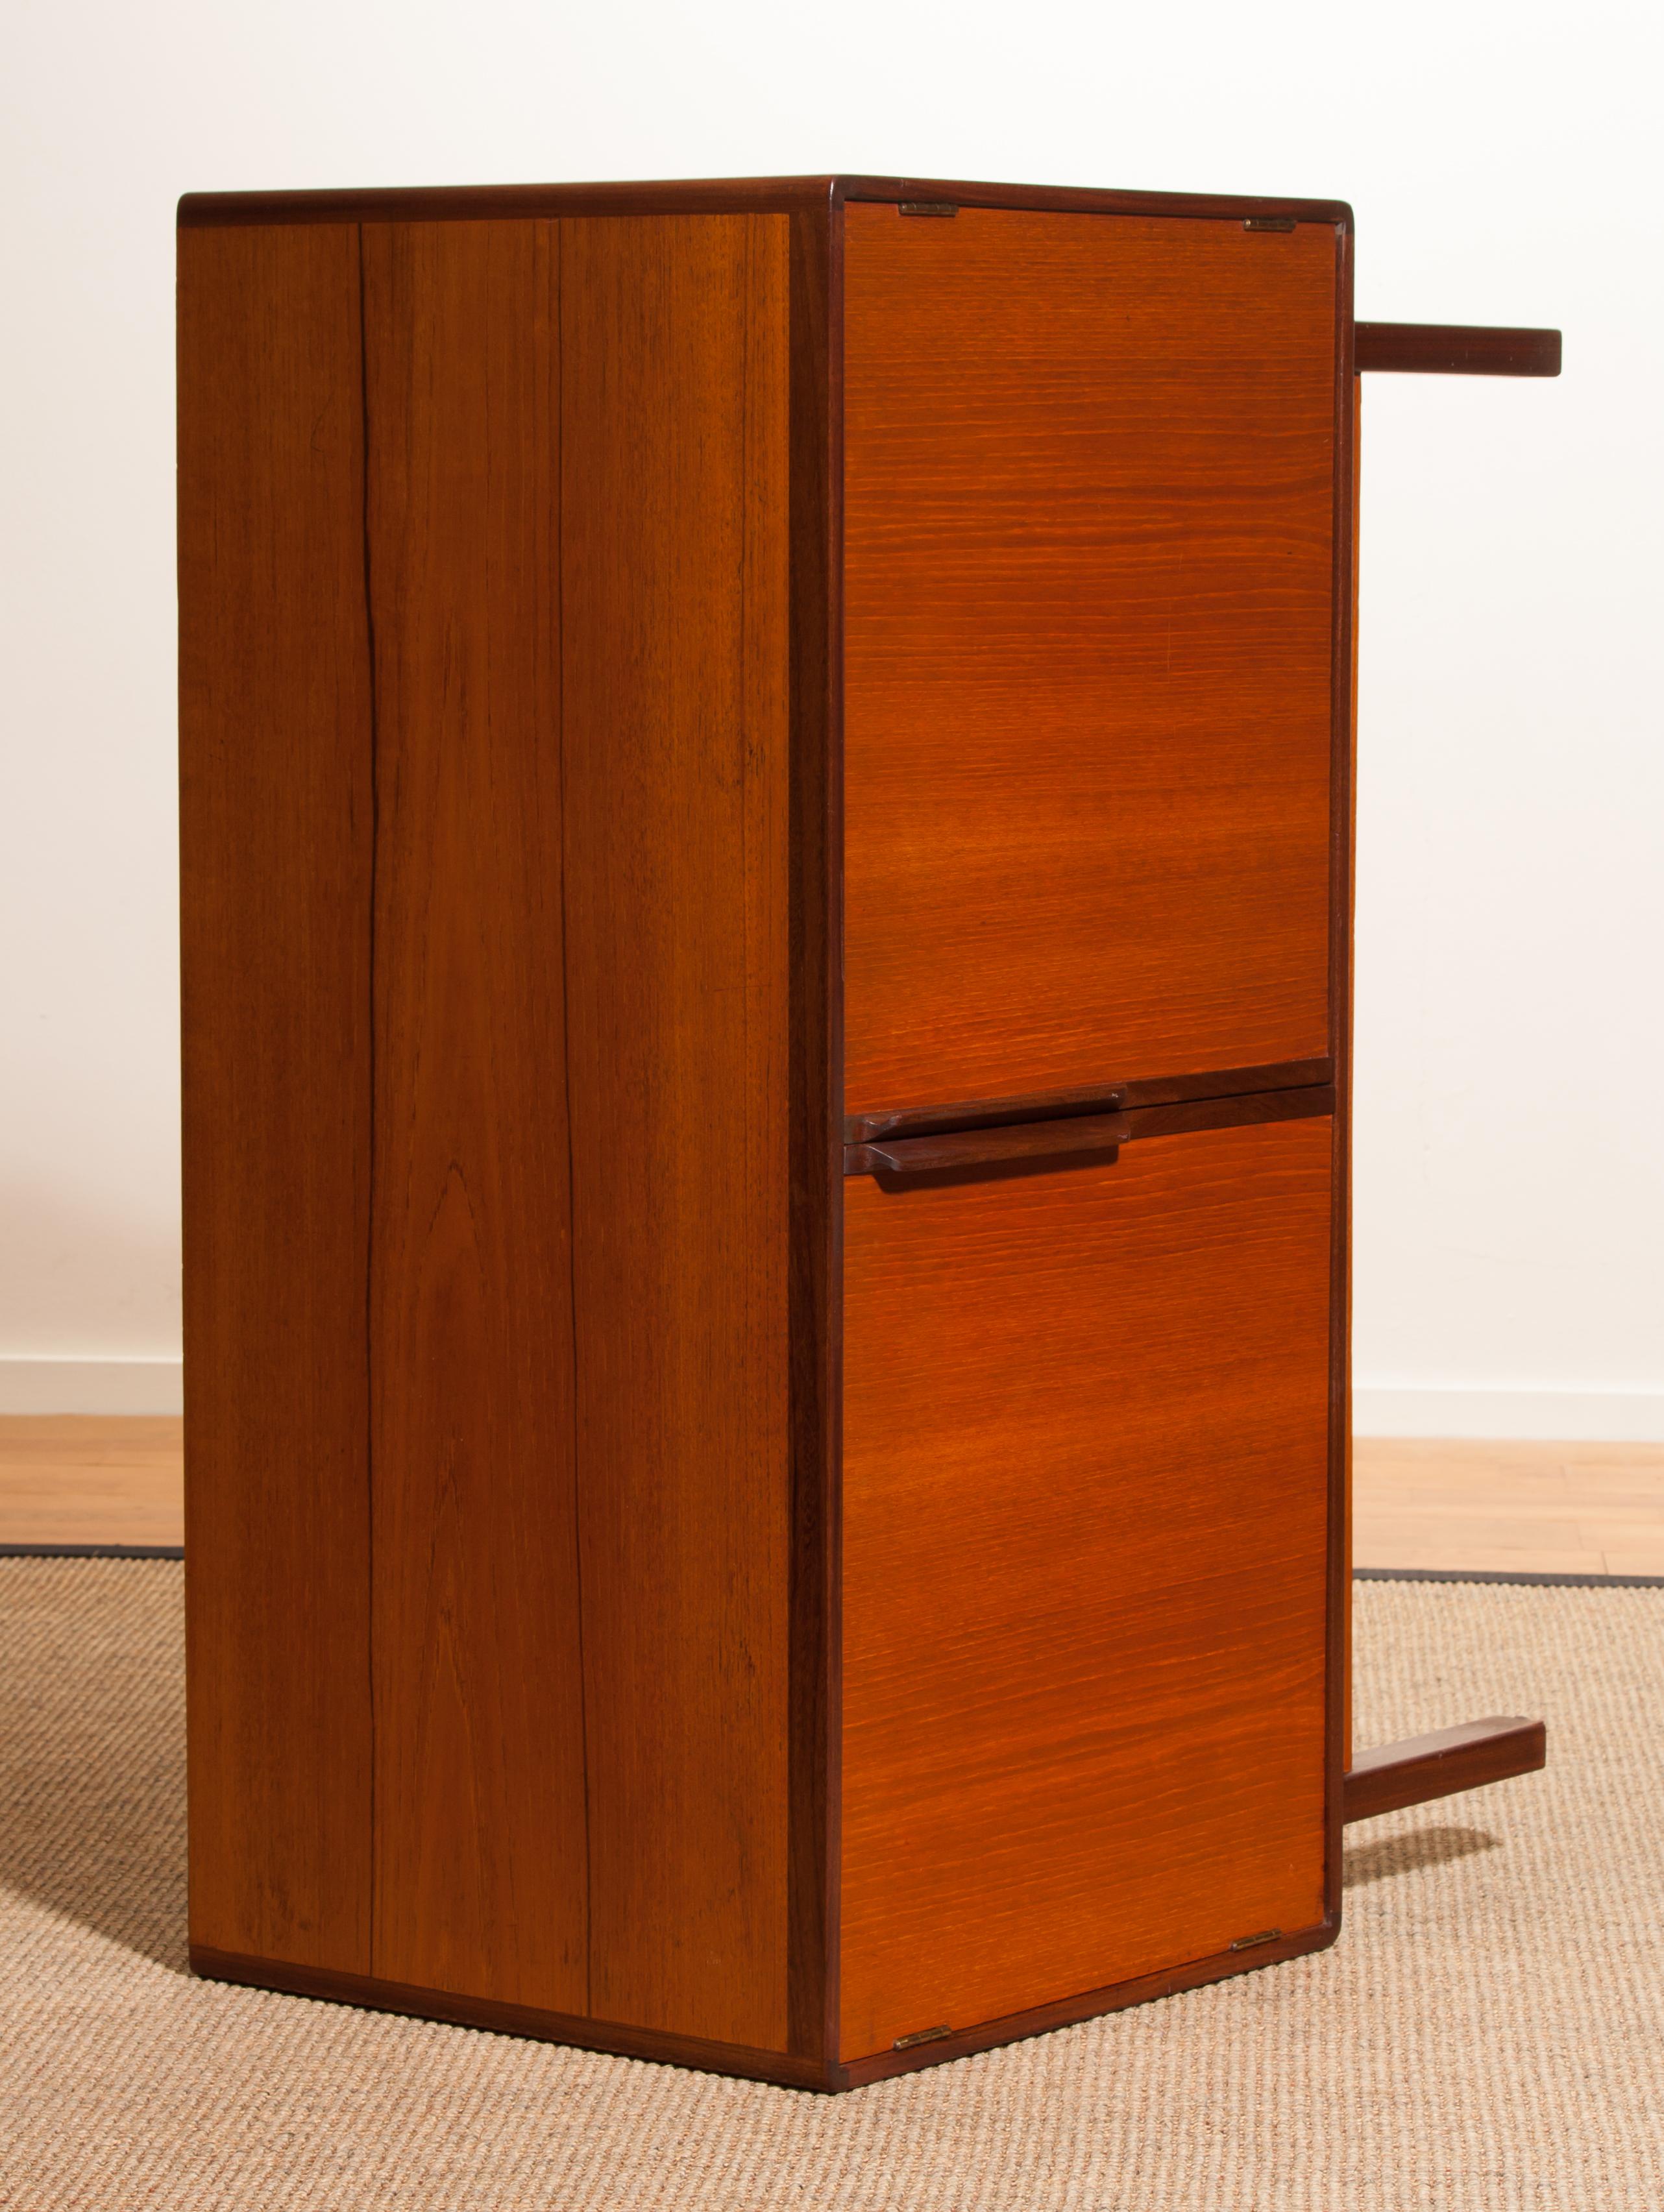 1960s, Teak and Palisander Small Sideboard Cabinet by Asko Finland 2